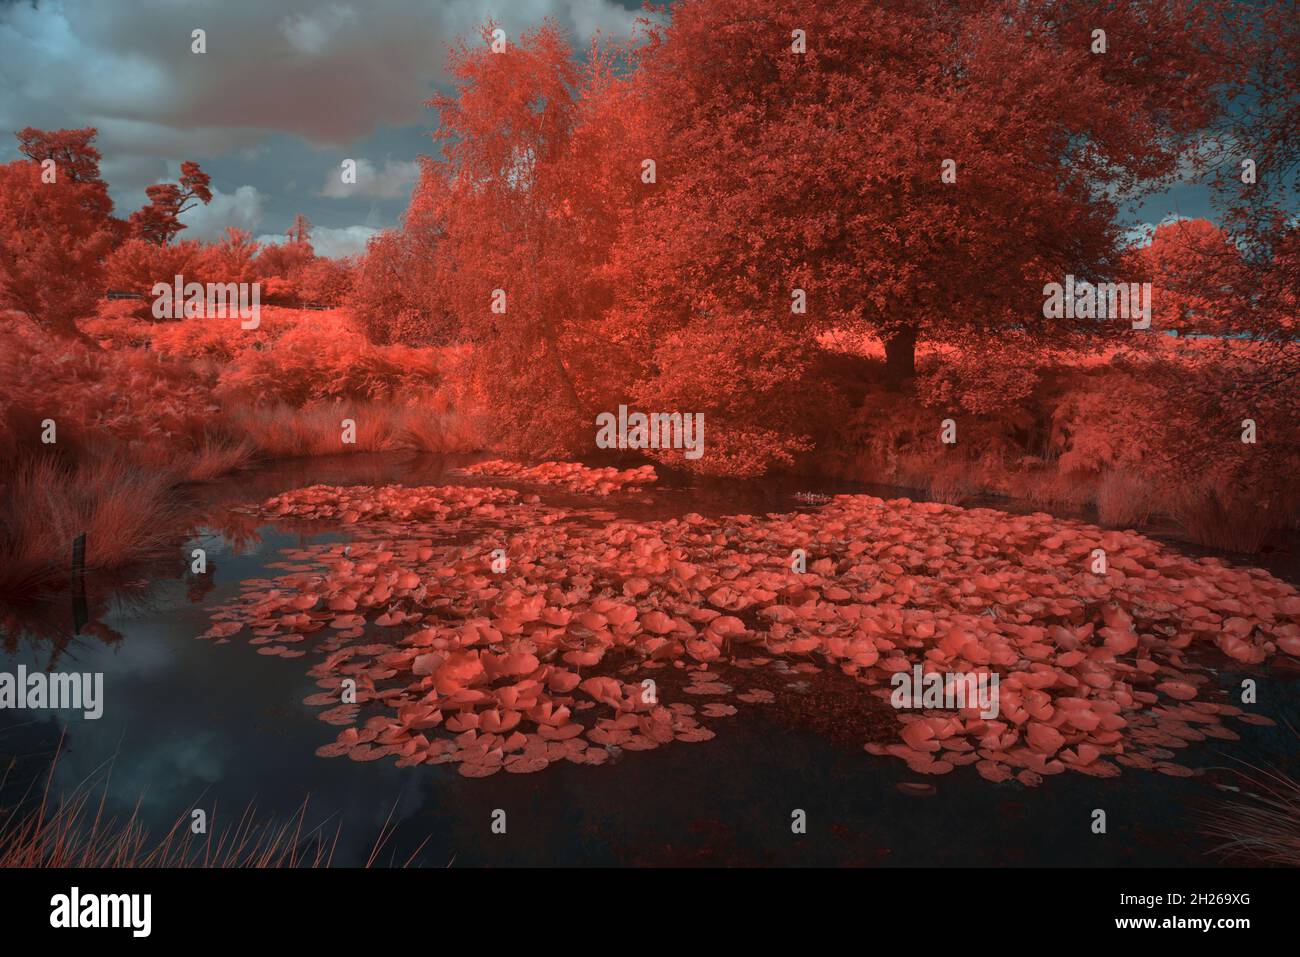 Fagus sylvatica  Quercus robur trees chloroplast in healthy leaf reflect heat infrared daylight and appear red as in aerochrome film Stock Photo